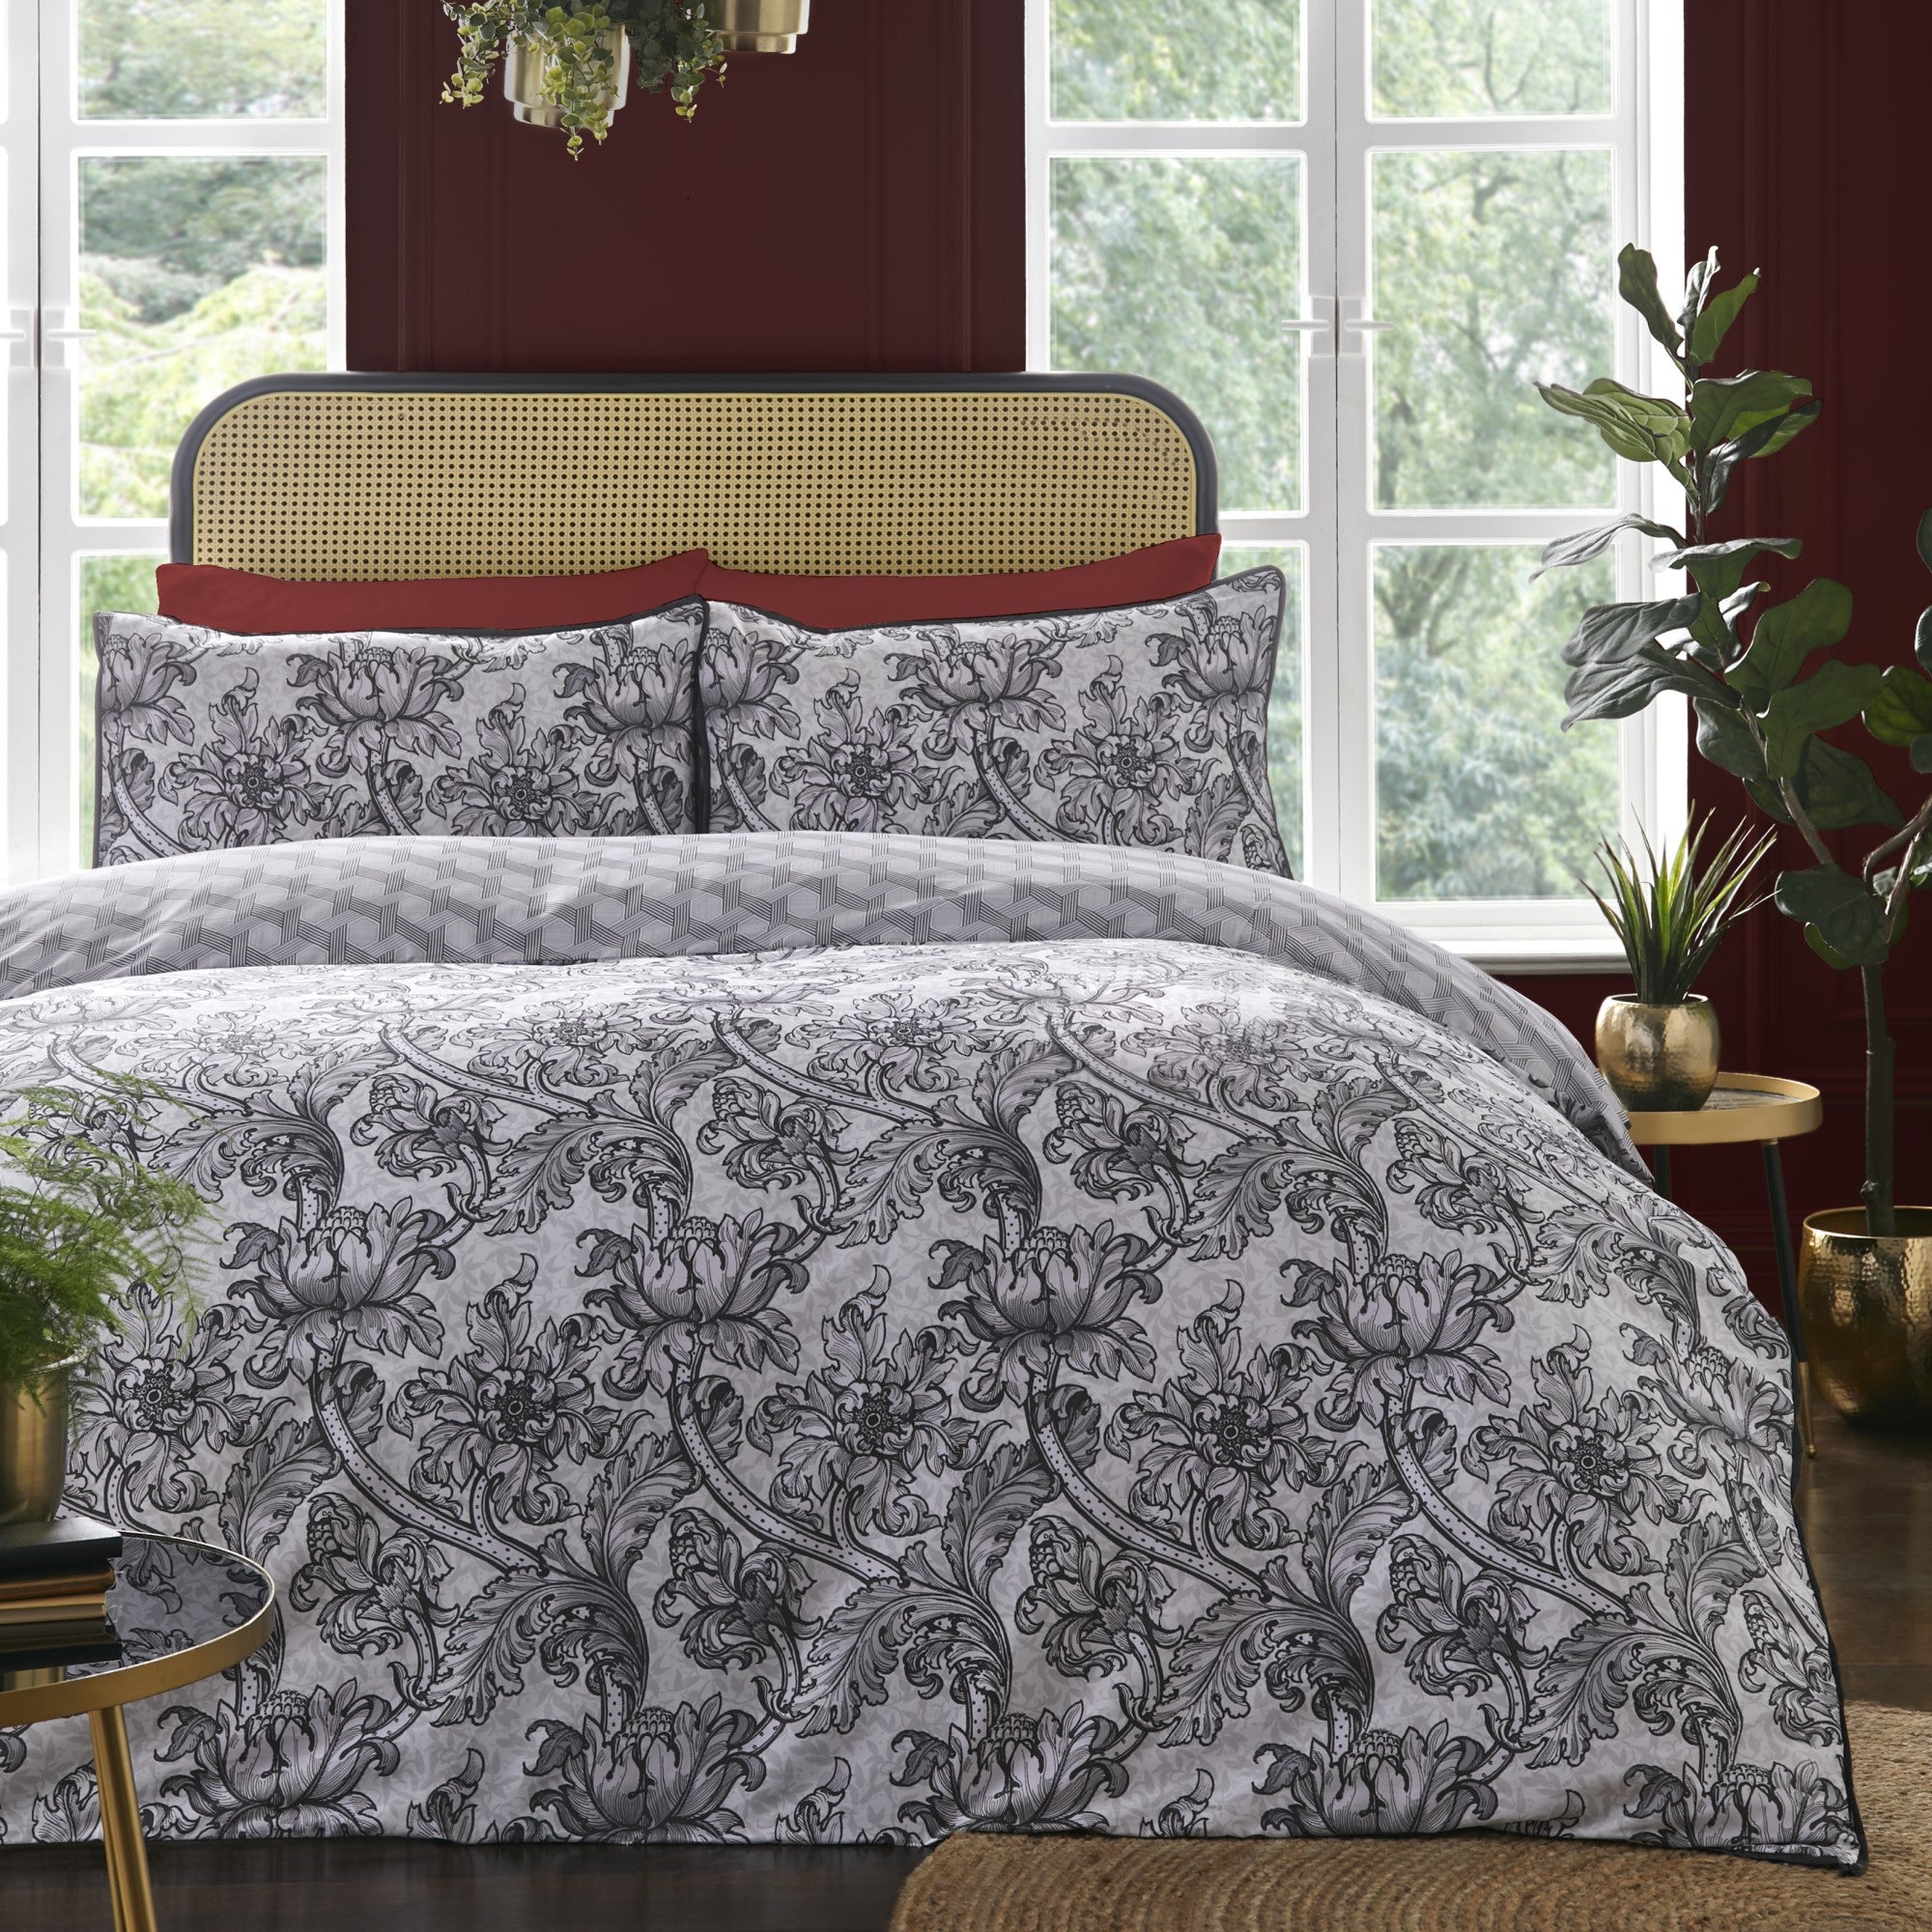 Duvet Cover Set Heart of The Home by Laurence Llewelyn-Bowen in Black